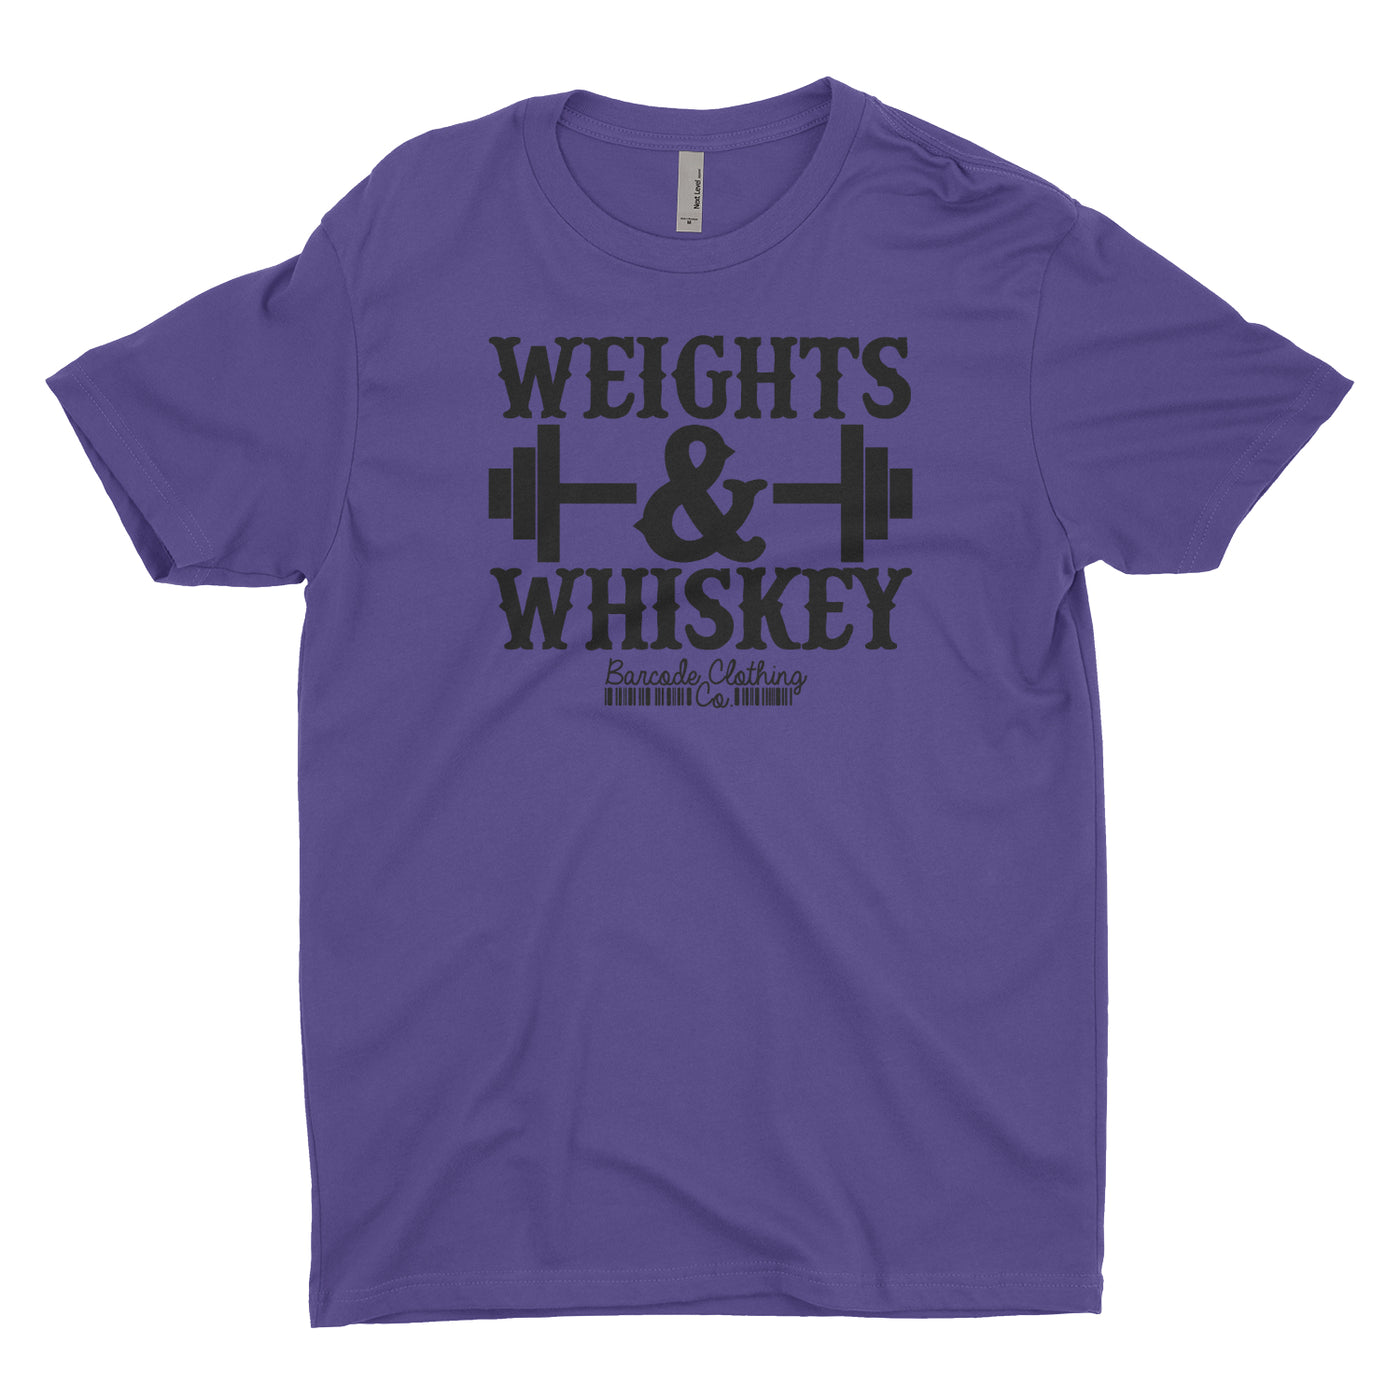 Weights & Whiskey Blacked Out